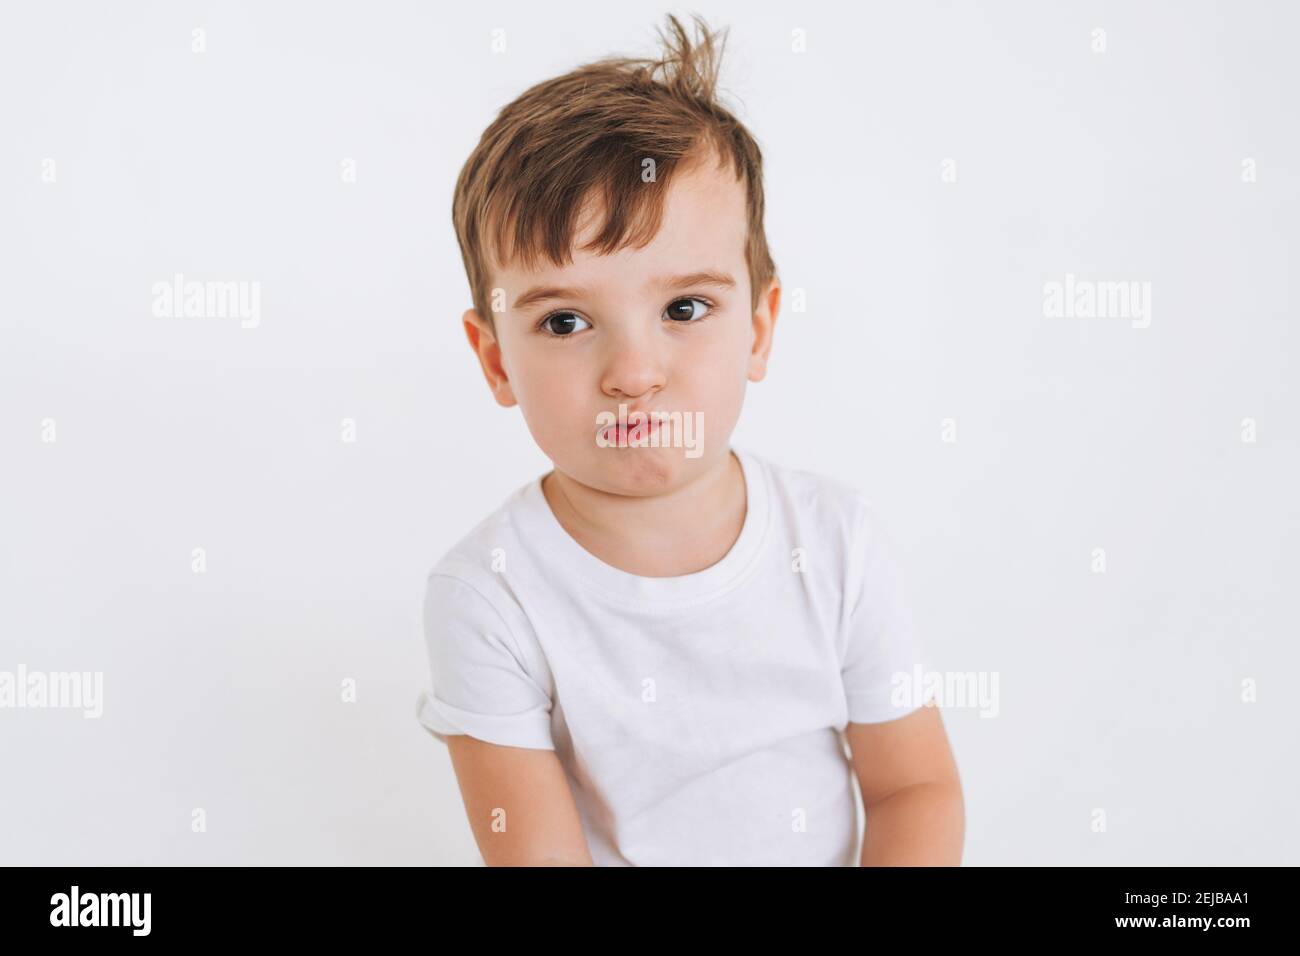 Funny cute thoughtful toddler boy in white t-shirt on white background Stock Photo